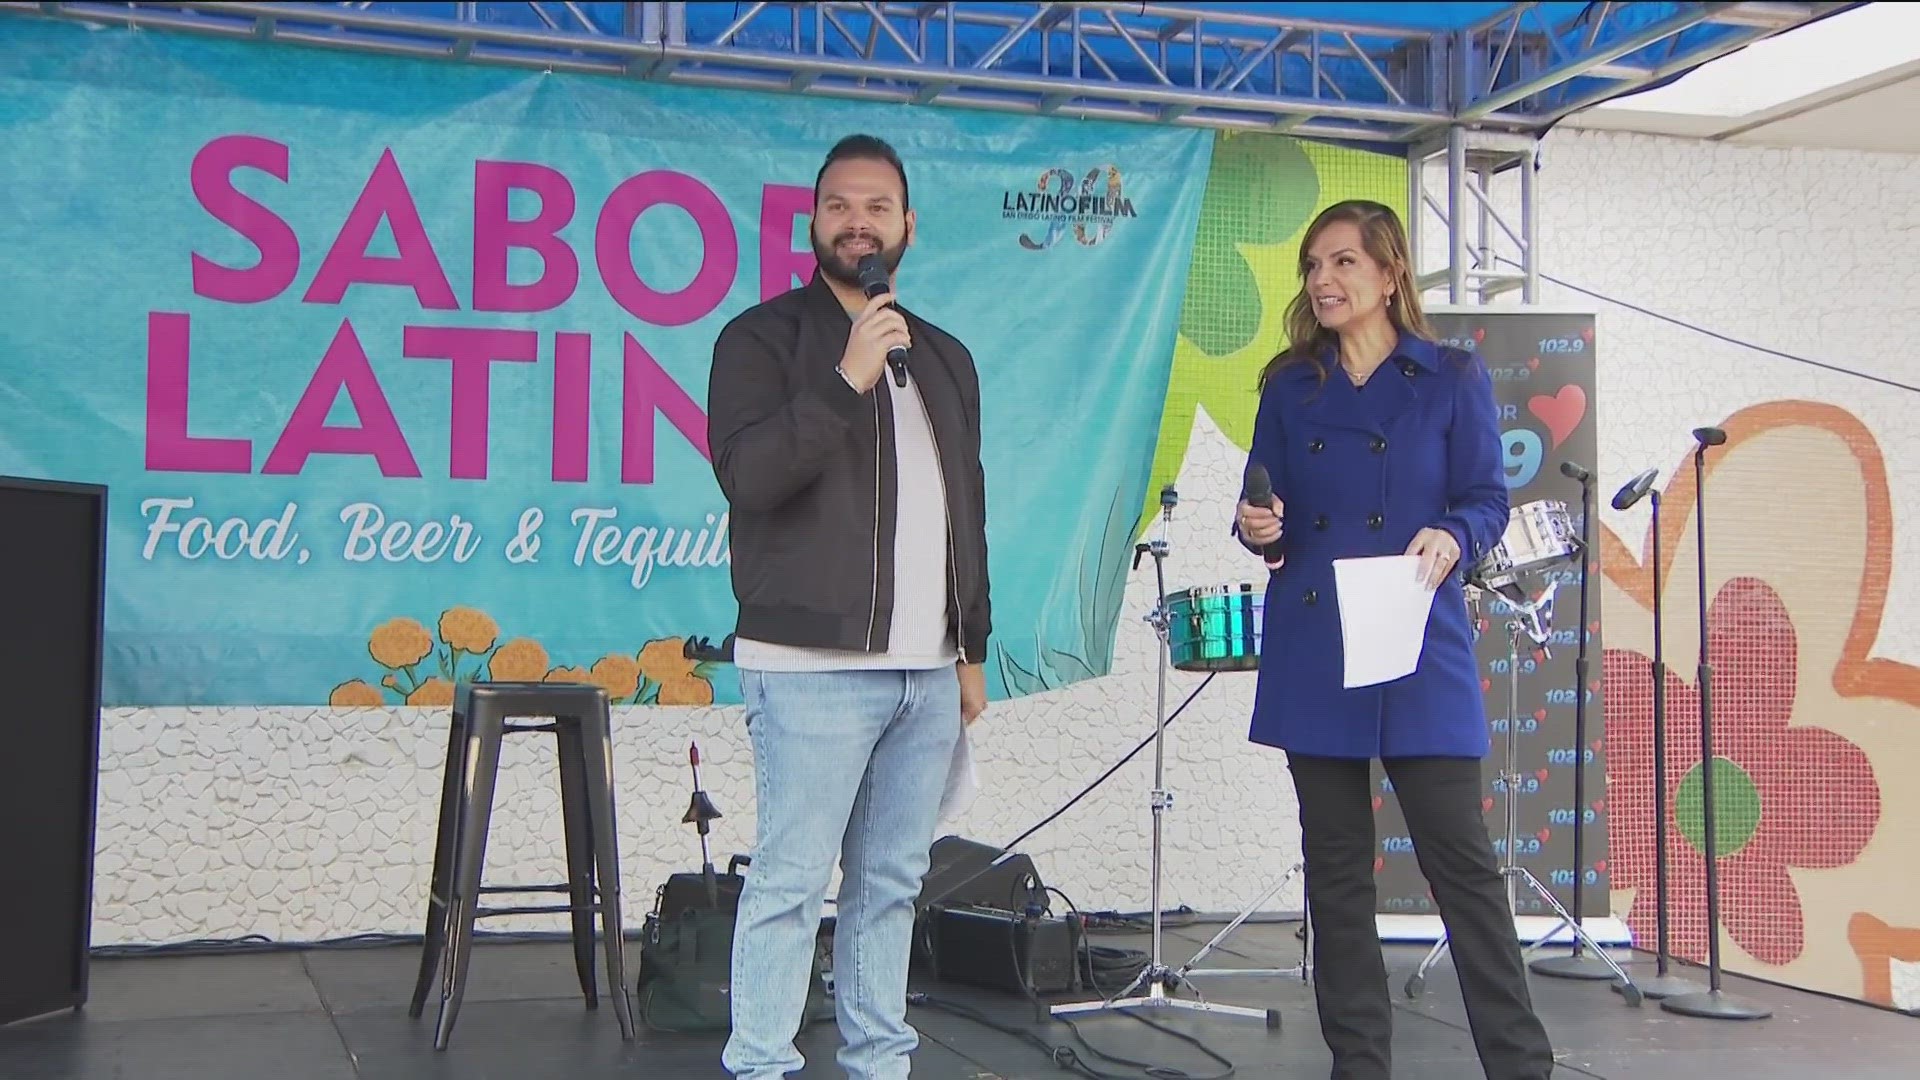 CBS 8's Jesse Pagan hosted the event at Westfield Mission Valley Mall, featuring a cooking match where different chefs faced off with their best Latin dishes.